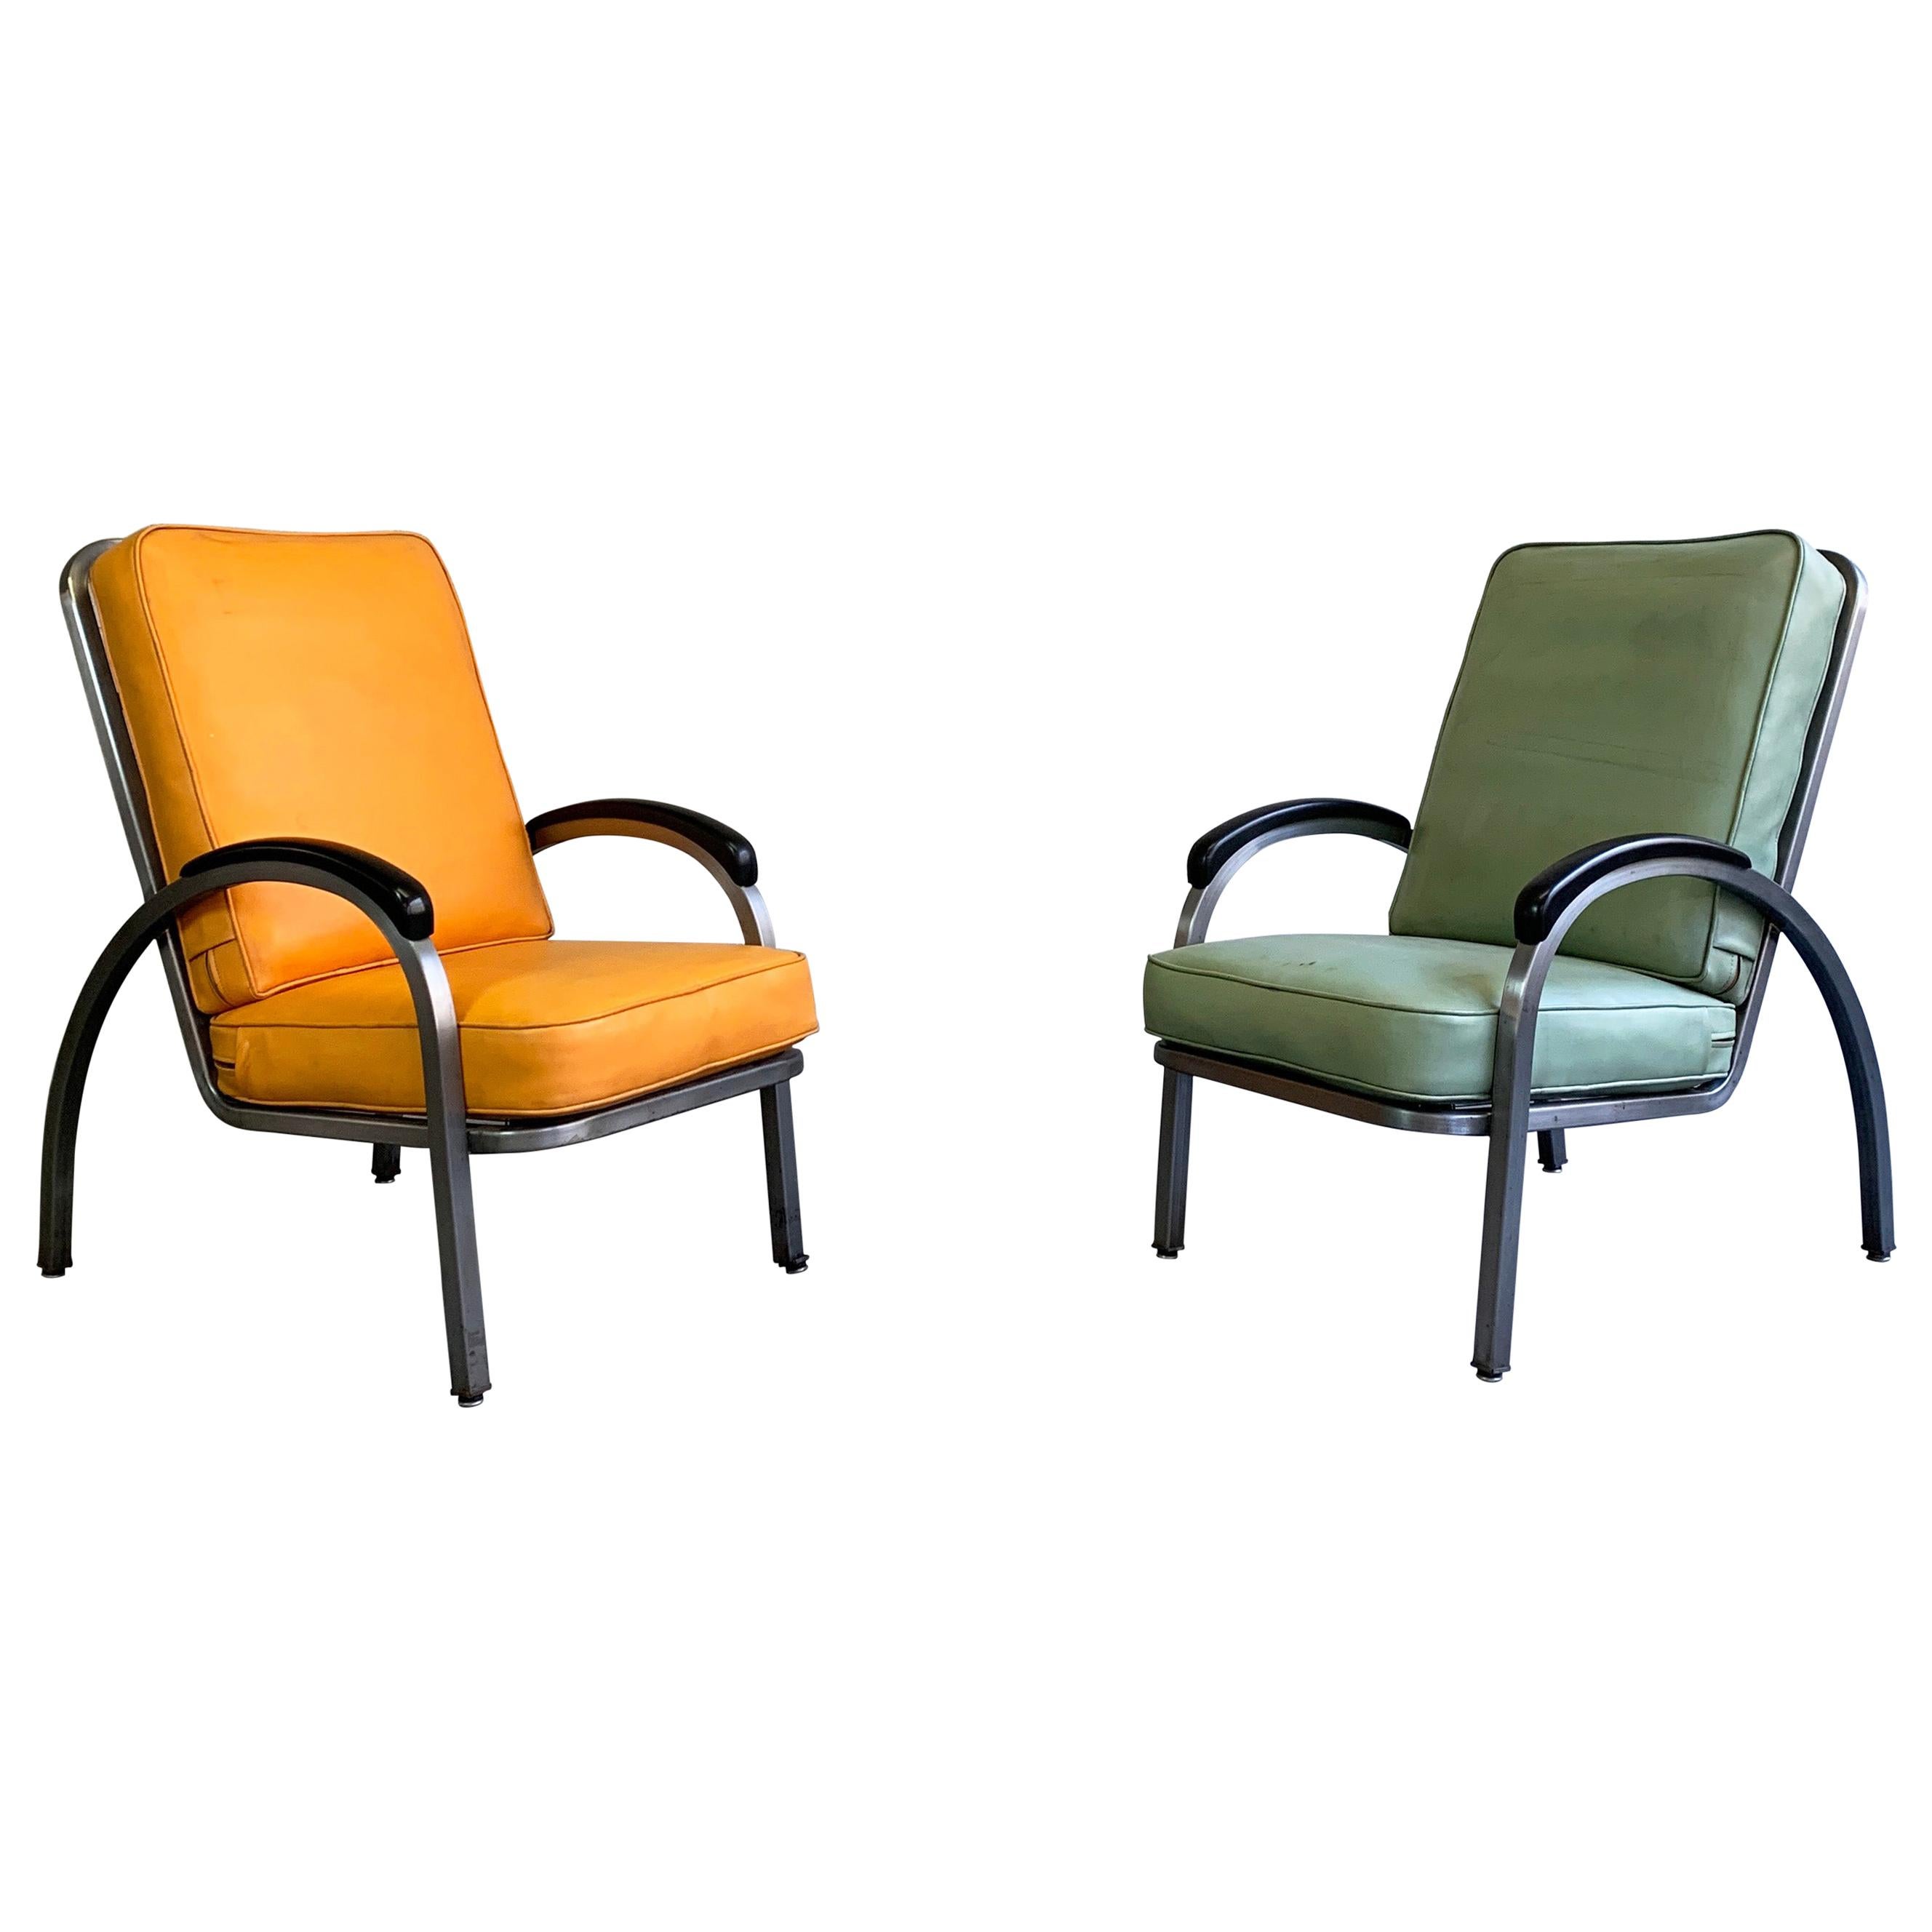 Art Deco Steel Armchairs by Norman Bel Geddes for Simmons Company Furniture